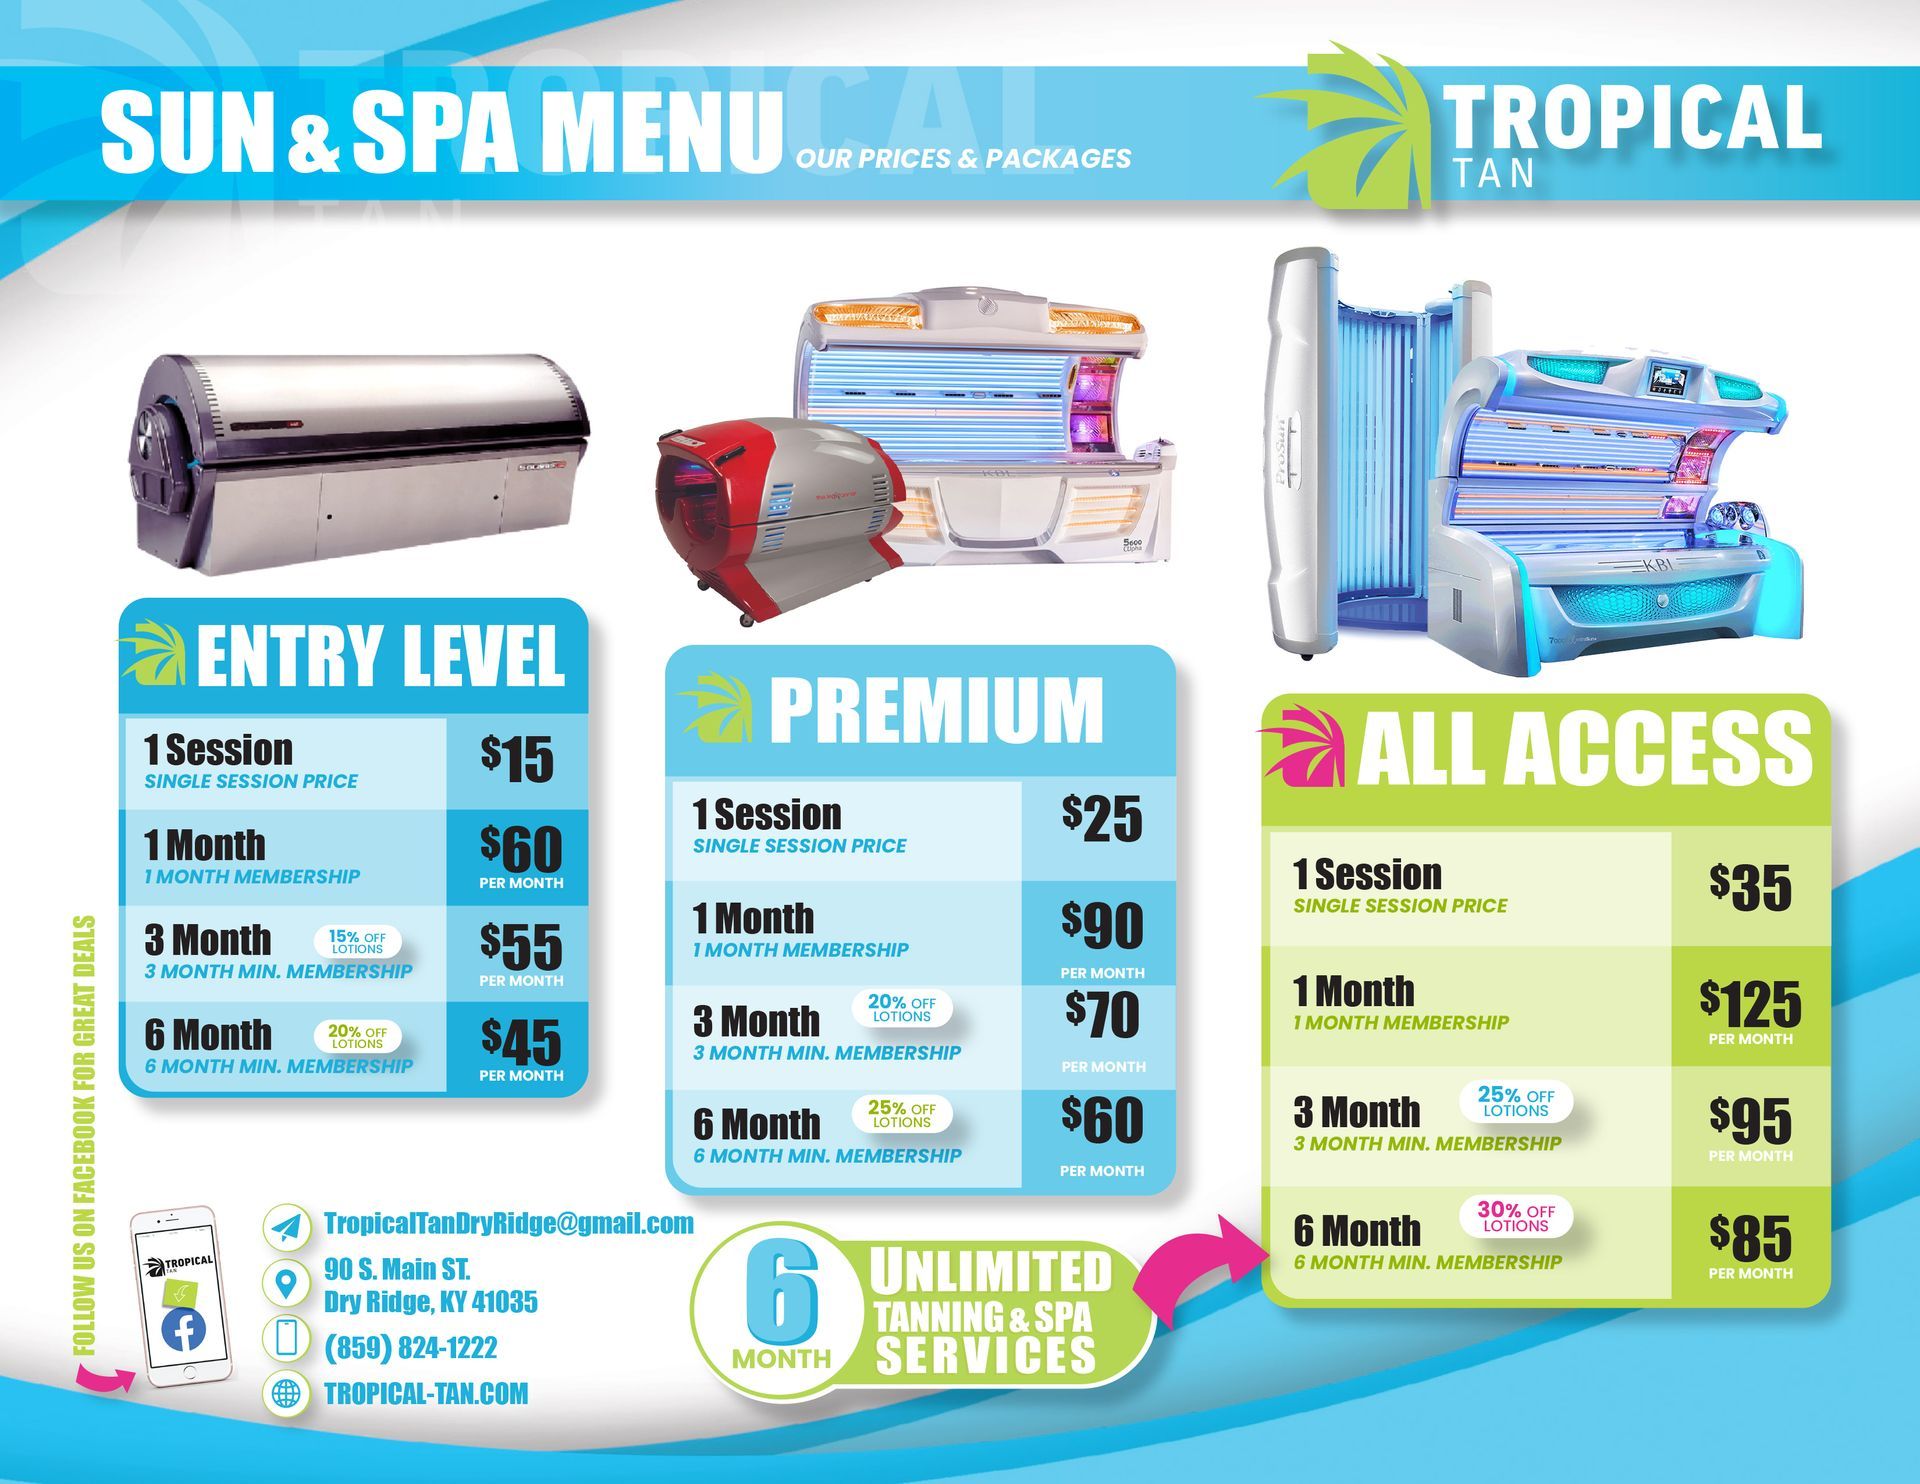 sun and spa menu prices and packages for UV tanning with all access tanning package